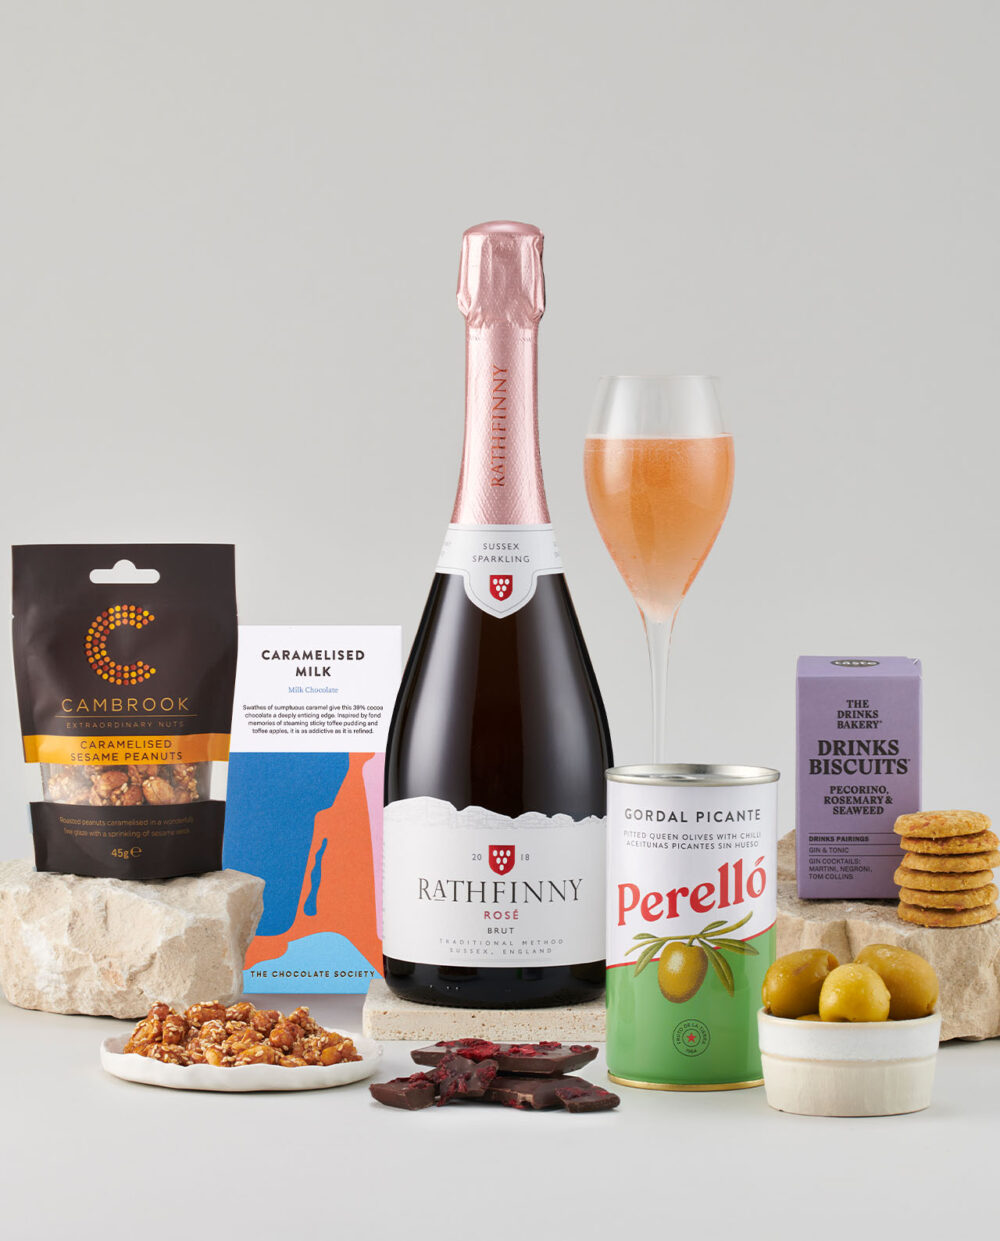 Bottle of Rose 2018 Surrounded by a Selection of Smartly Packaged Foods.